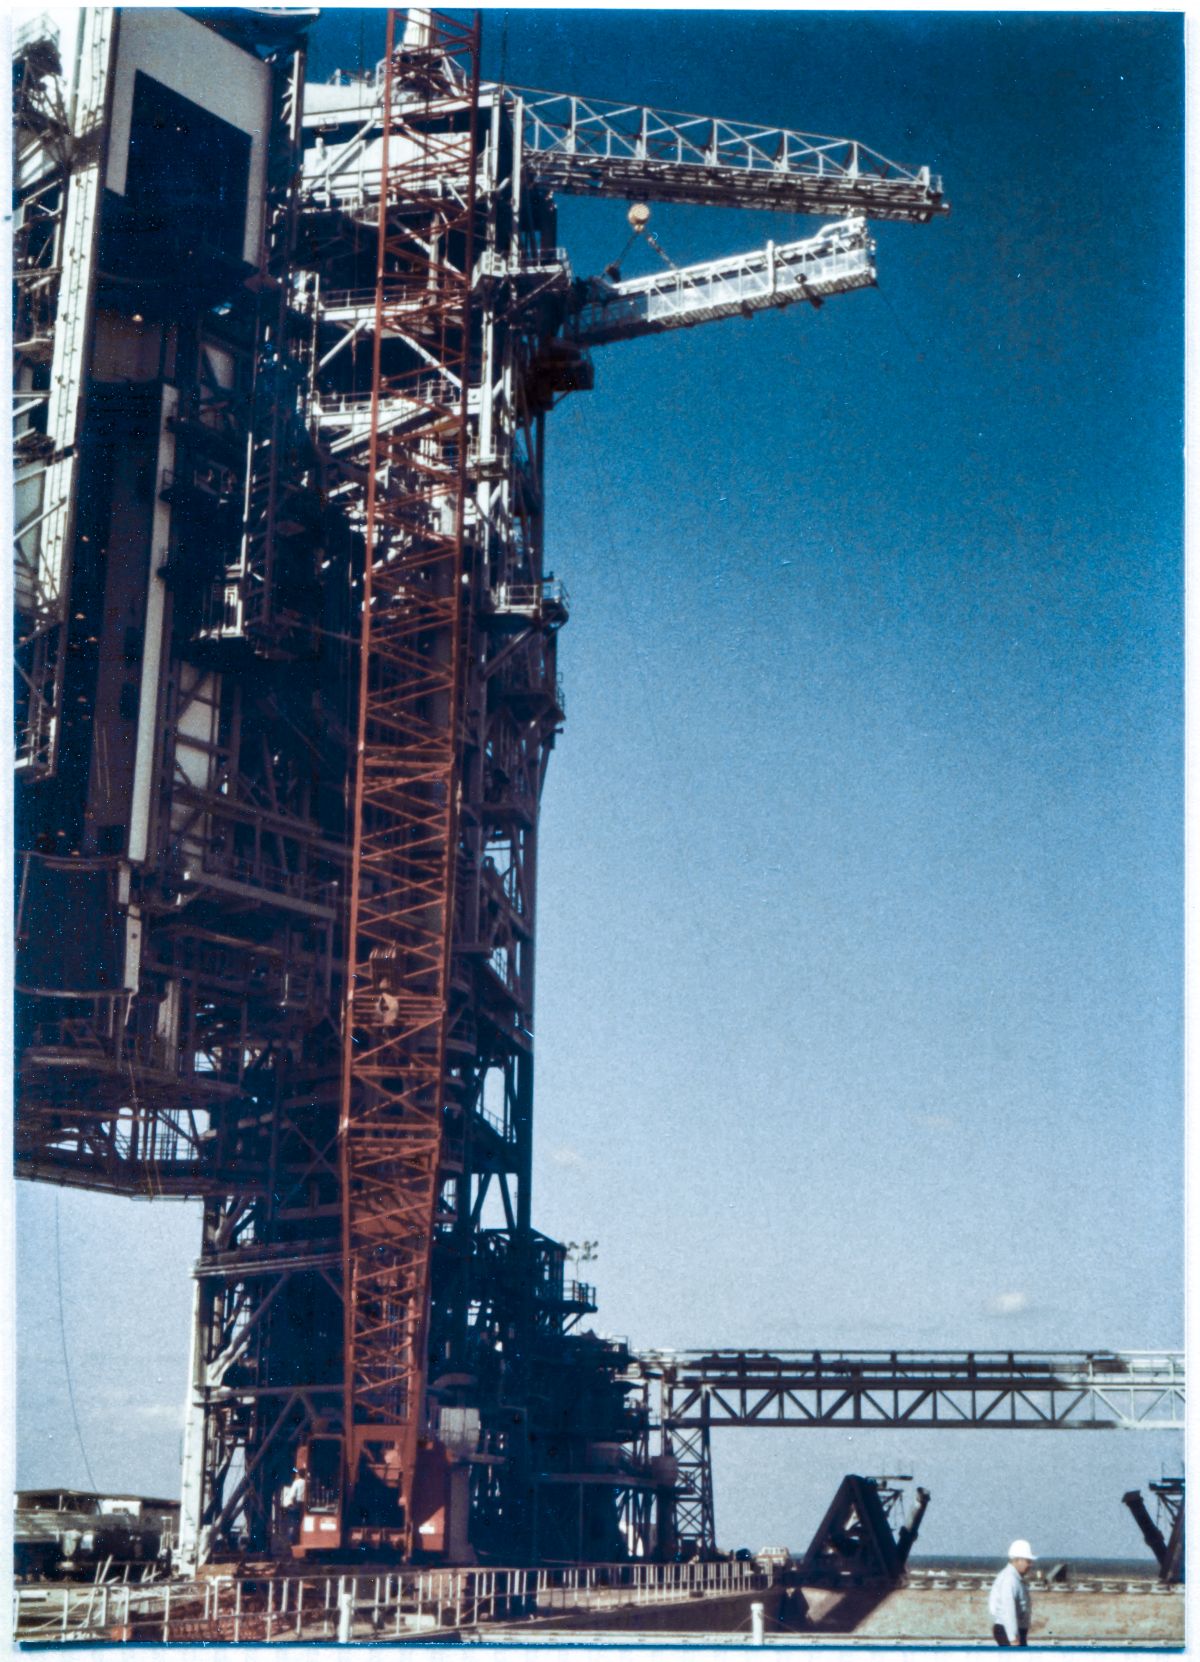 Image 109. At Space Shuttle Launch Complex 39-B, Kennedy Space Center, Florida, the GOX Arm has been lifted into its final position, and Ivey Steel's Union Ironworkers have commenced with bolt-up, fastening the Upper and Lower Hinge Boxes on the Arm to the Strongback which will support it, in its working location at the top of the FSS. The Hammerhead Crane, carrying the Lifting Sling which is still attached to the Arm, remains hooked-on, and will stay that way until the bolt-up is complete, at which point the Lifting Sling will be unpinned from the arm, and the Crane will swing to the side and lower it to the ground, where it will be removed from the hook and handed back over to NASA. Photo by James MacLaren.